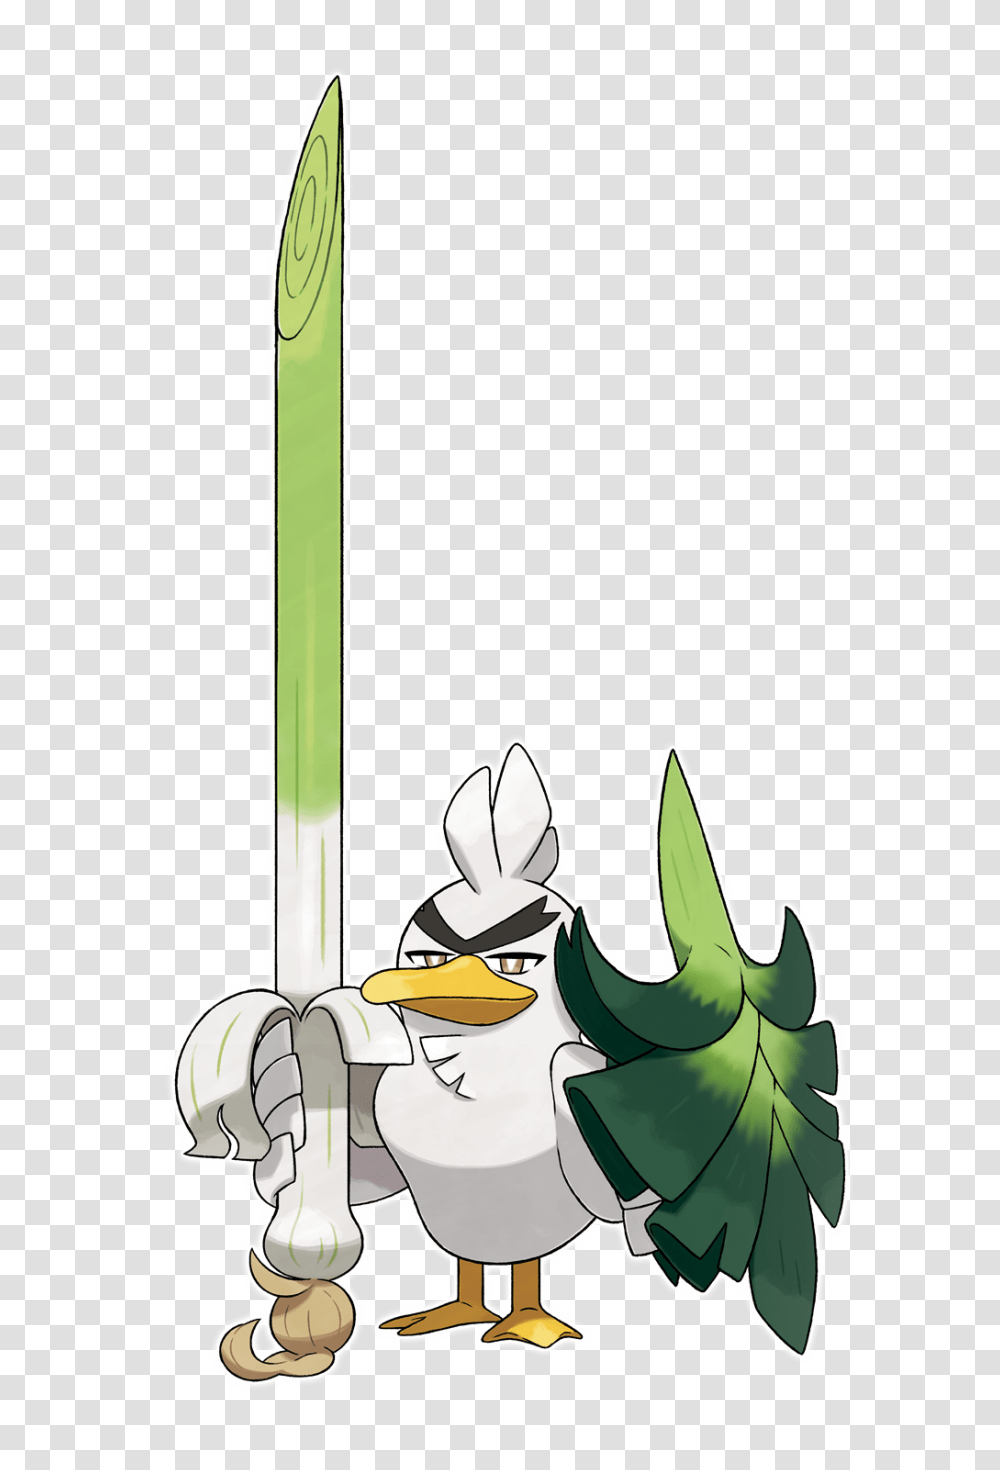 Ben Hanson Auf Twitter So With The Introduction Of Pokemon Sirfetch D, Plant, Stick, Cane, Flower Transparent Png